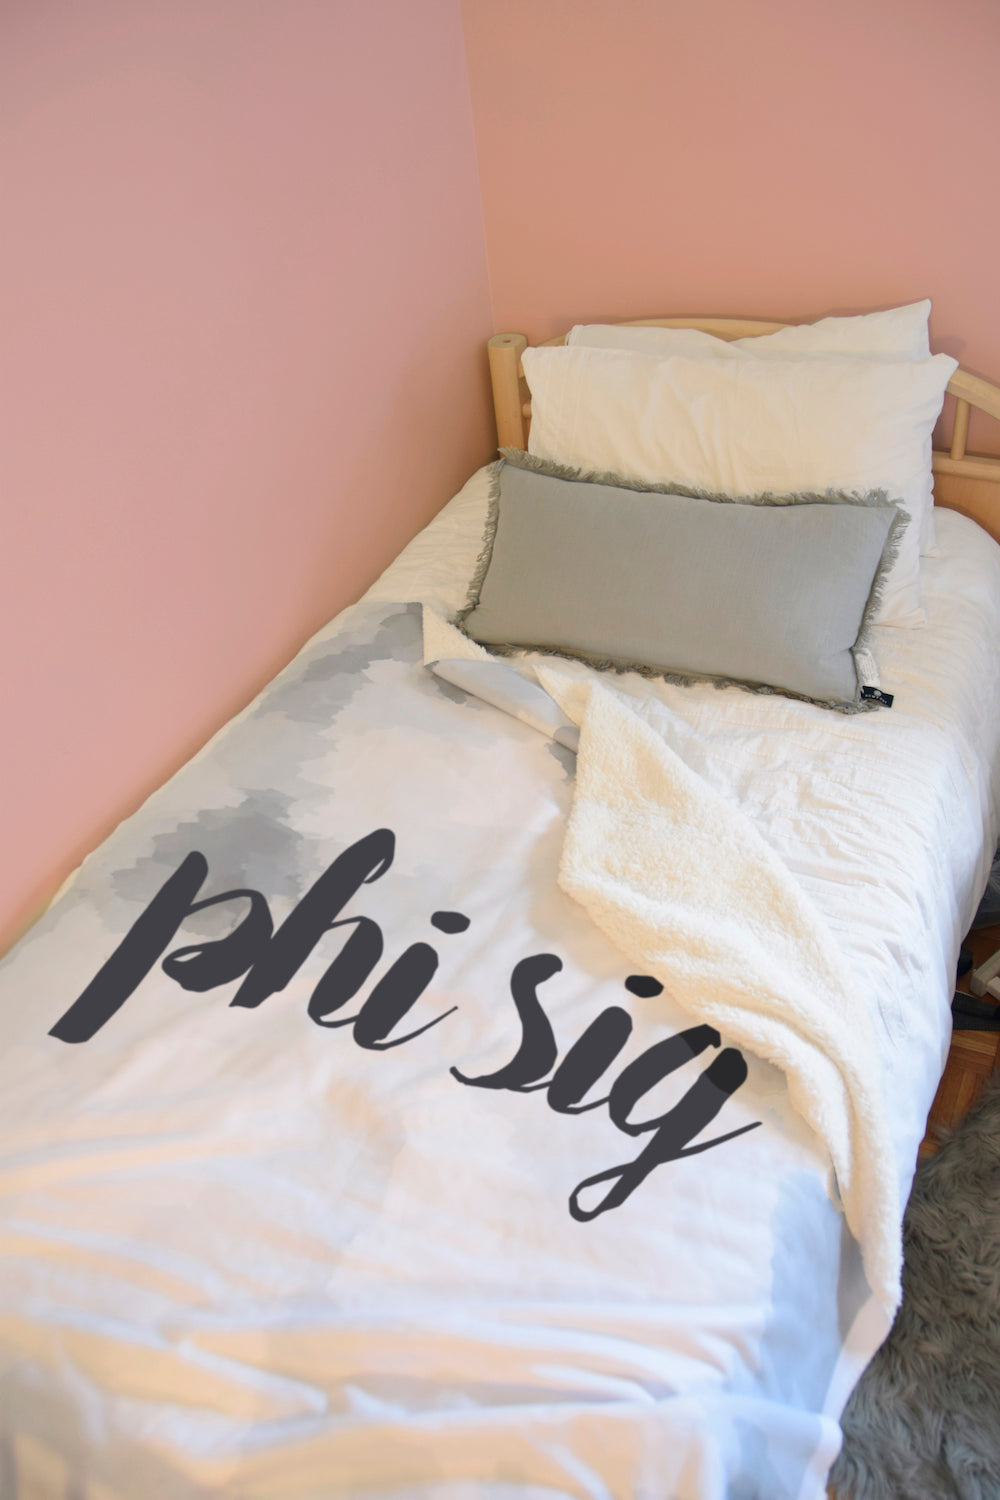 The Phi Sig "Couldn't be Softer" Sherpa Blanket